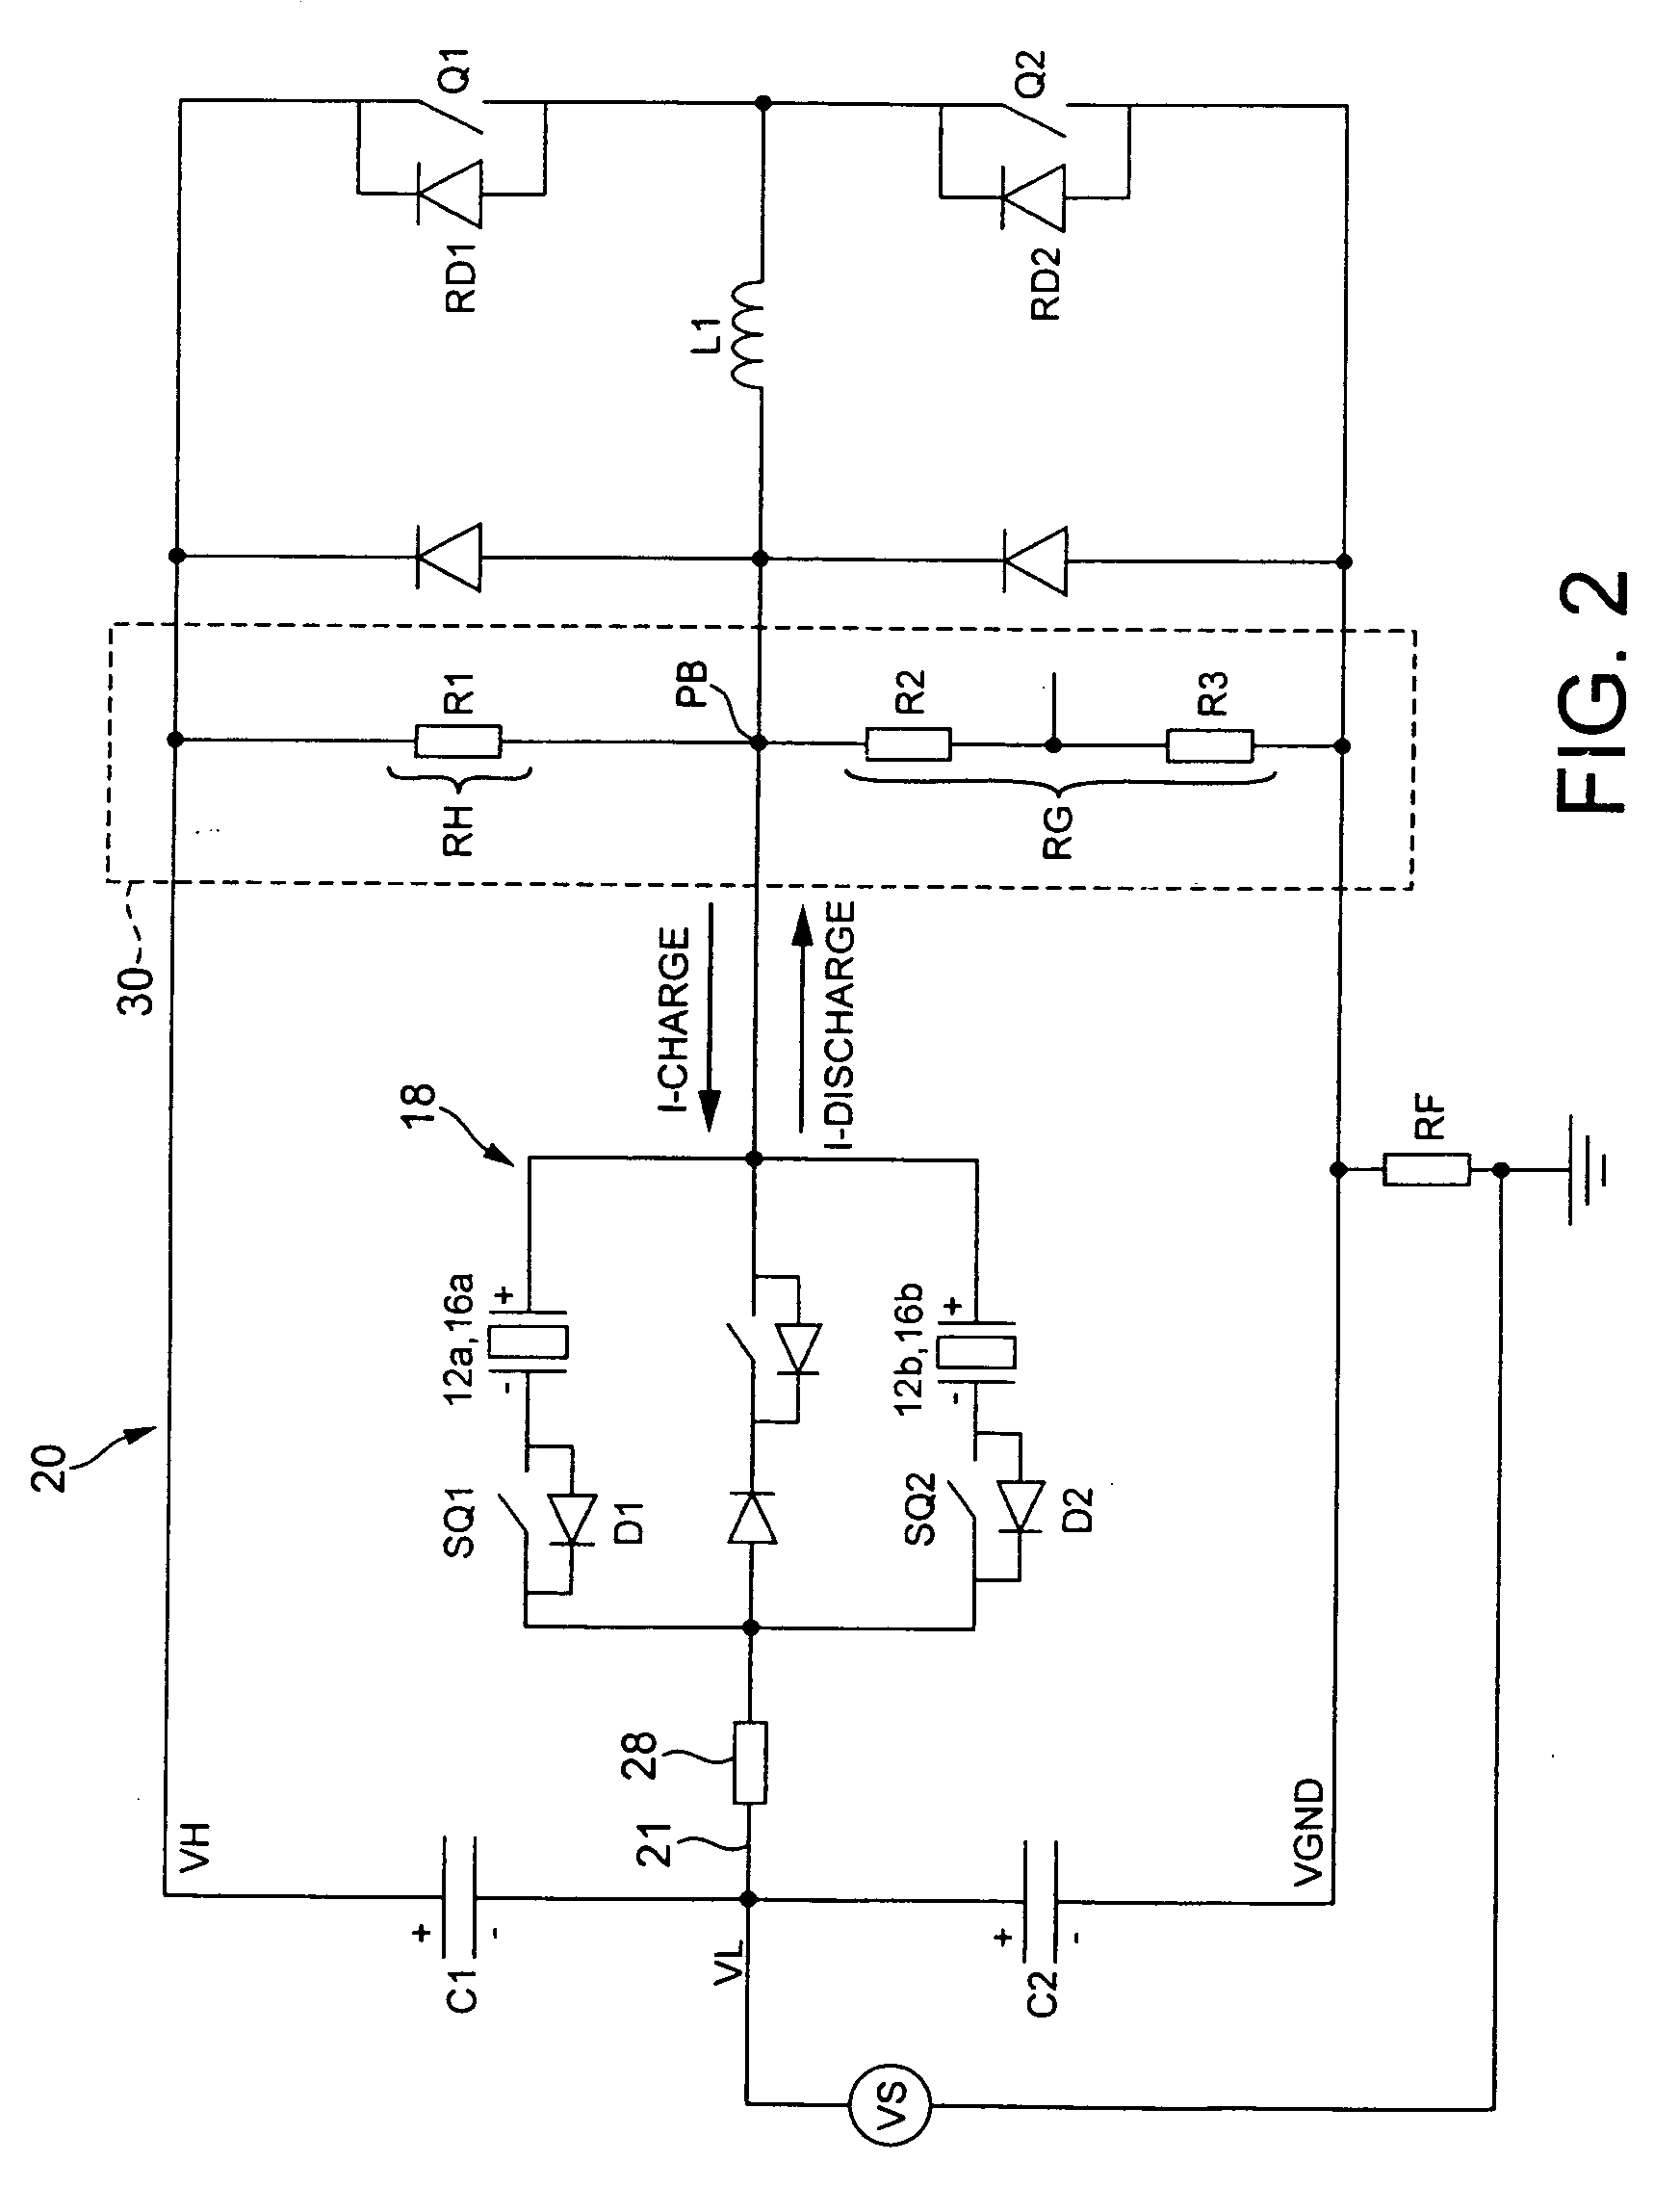 Detection of faults in an injector arrangement